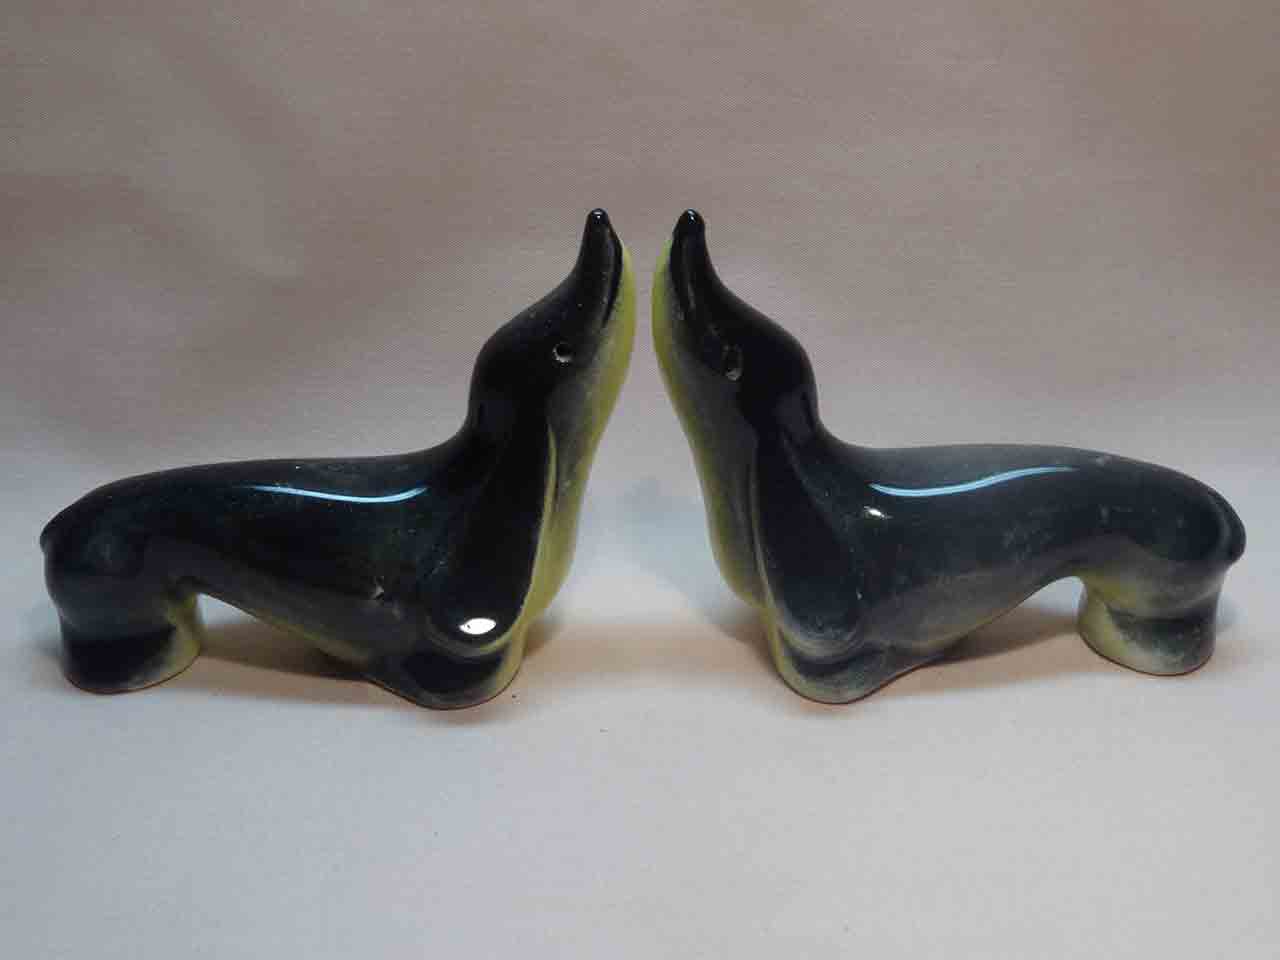 Pacific Pottery salt and pepper shakers - dogs